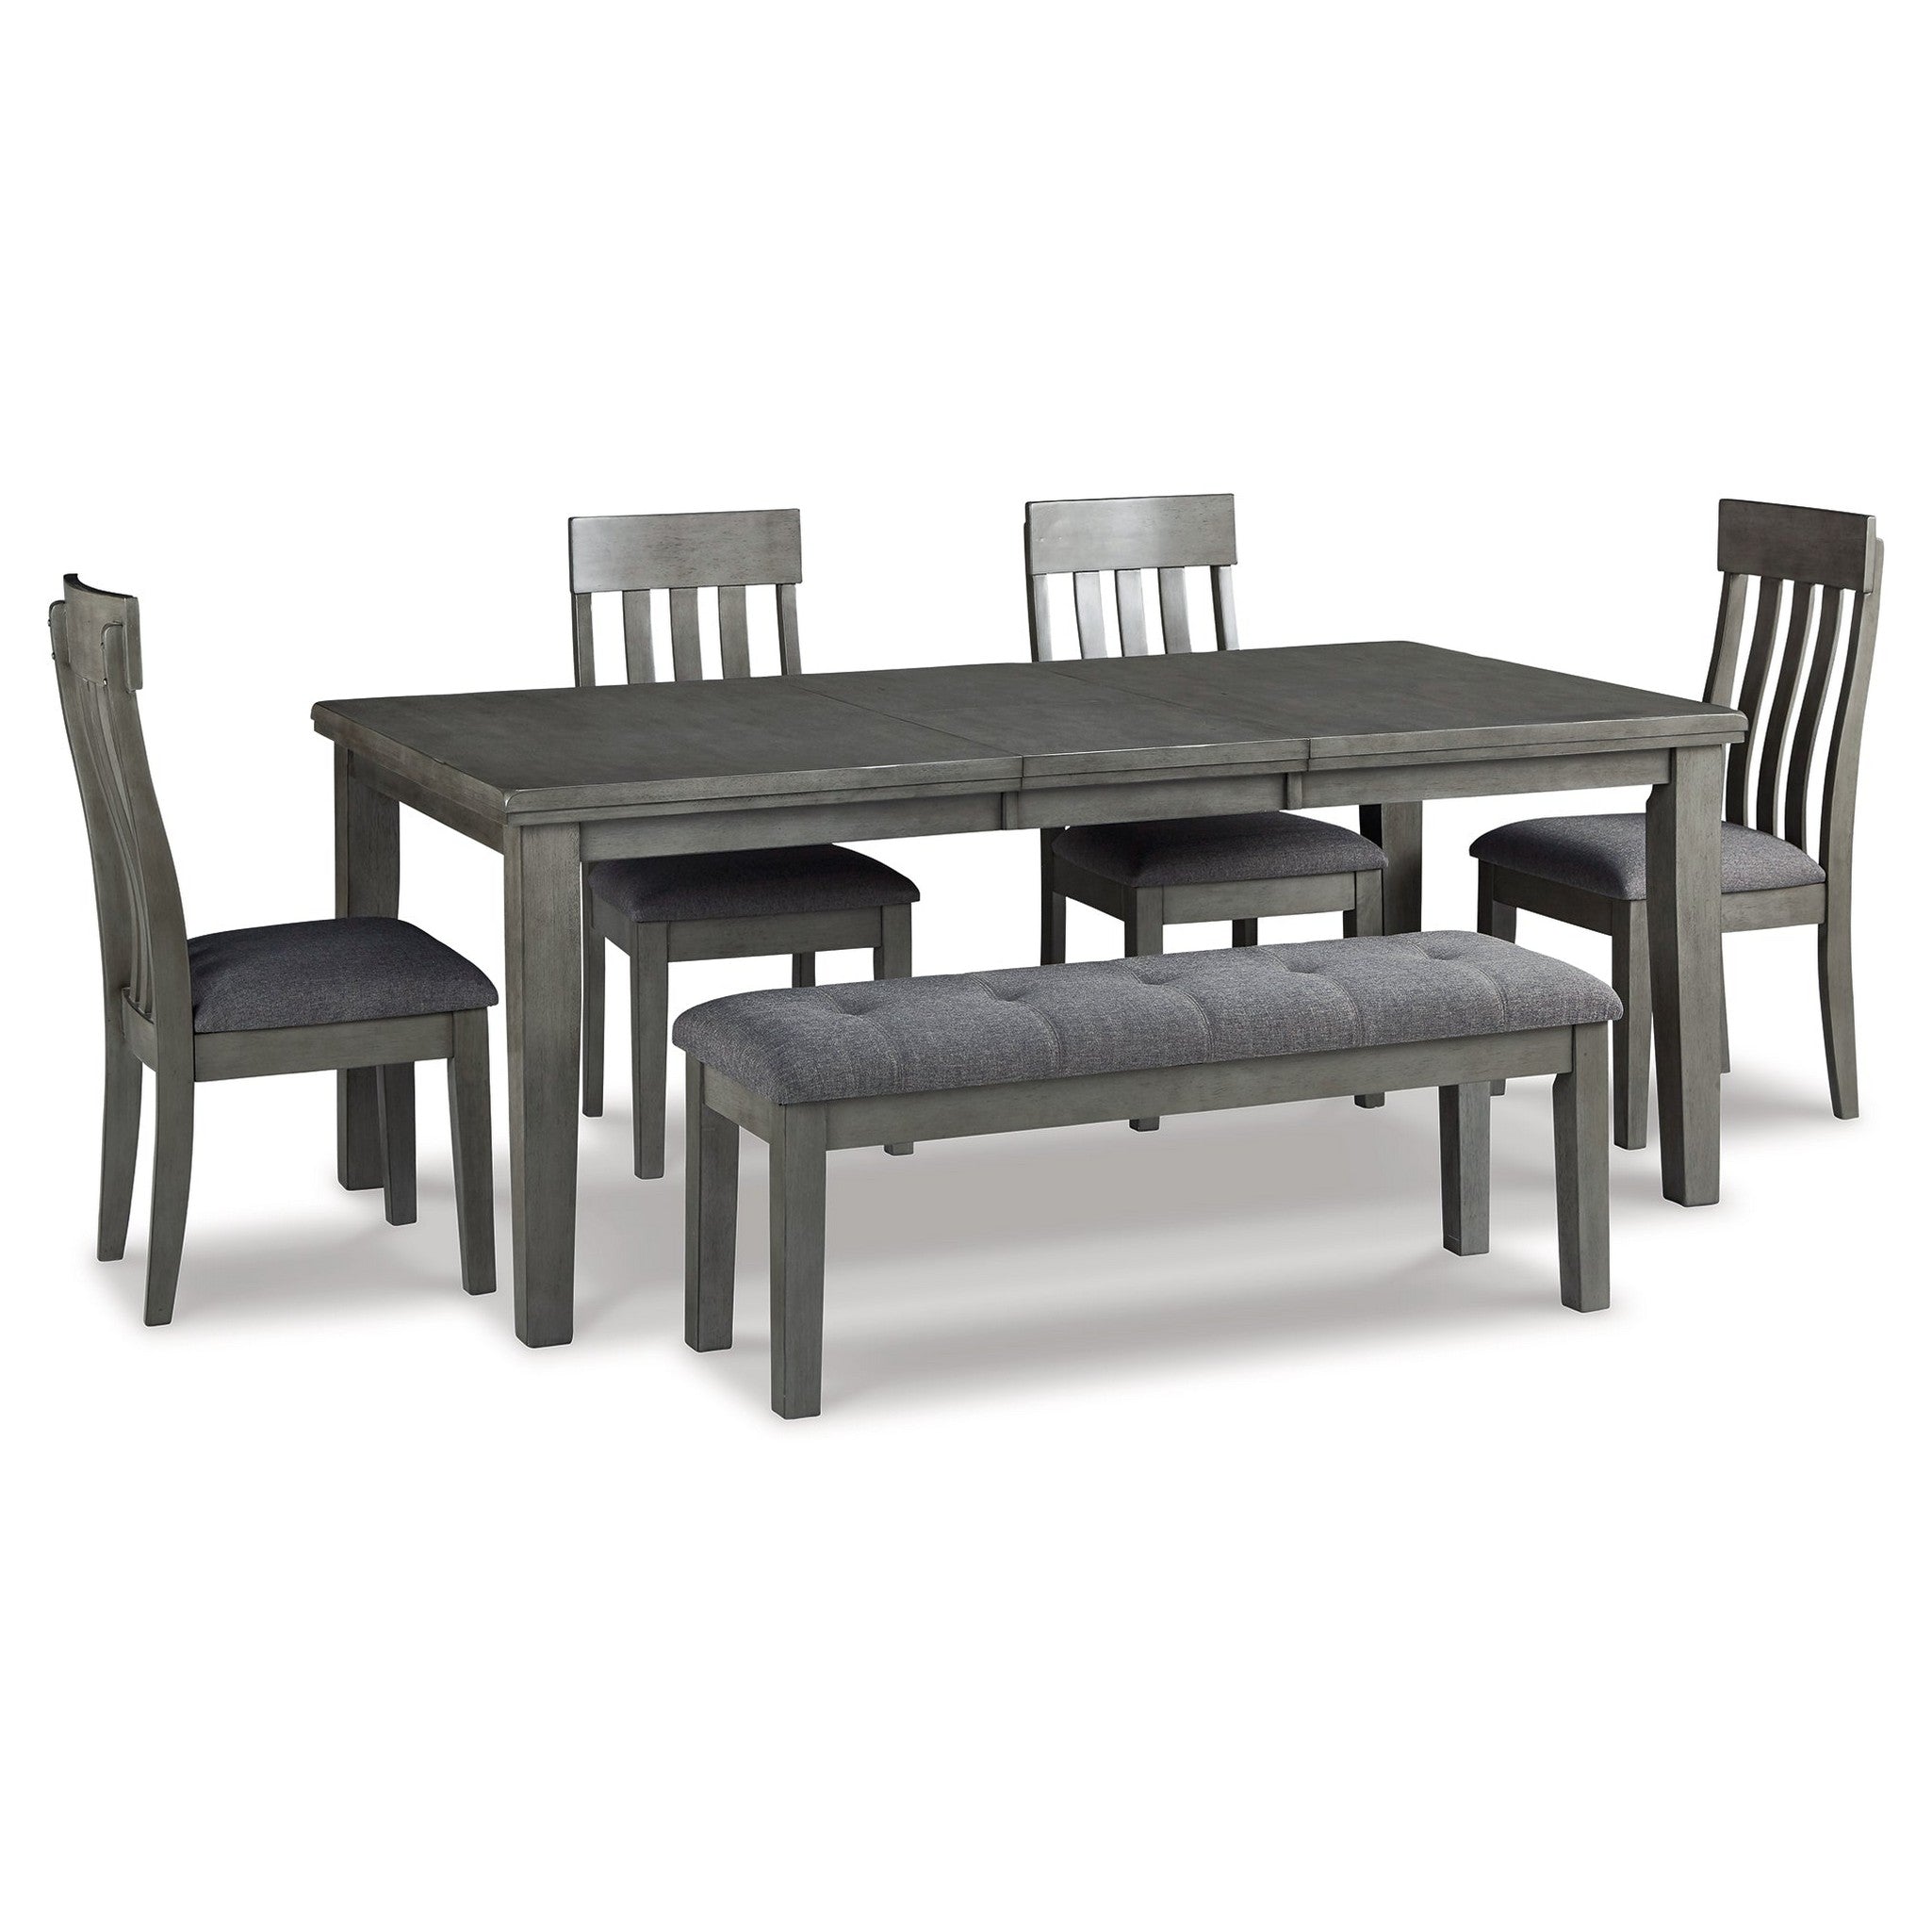 Hallanden Dining Table, 4 Chairs, and Bench Ash-D589D2